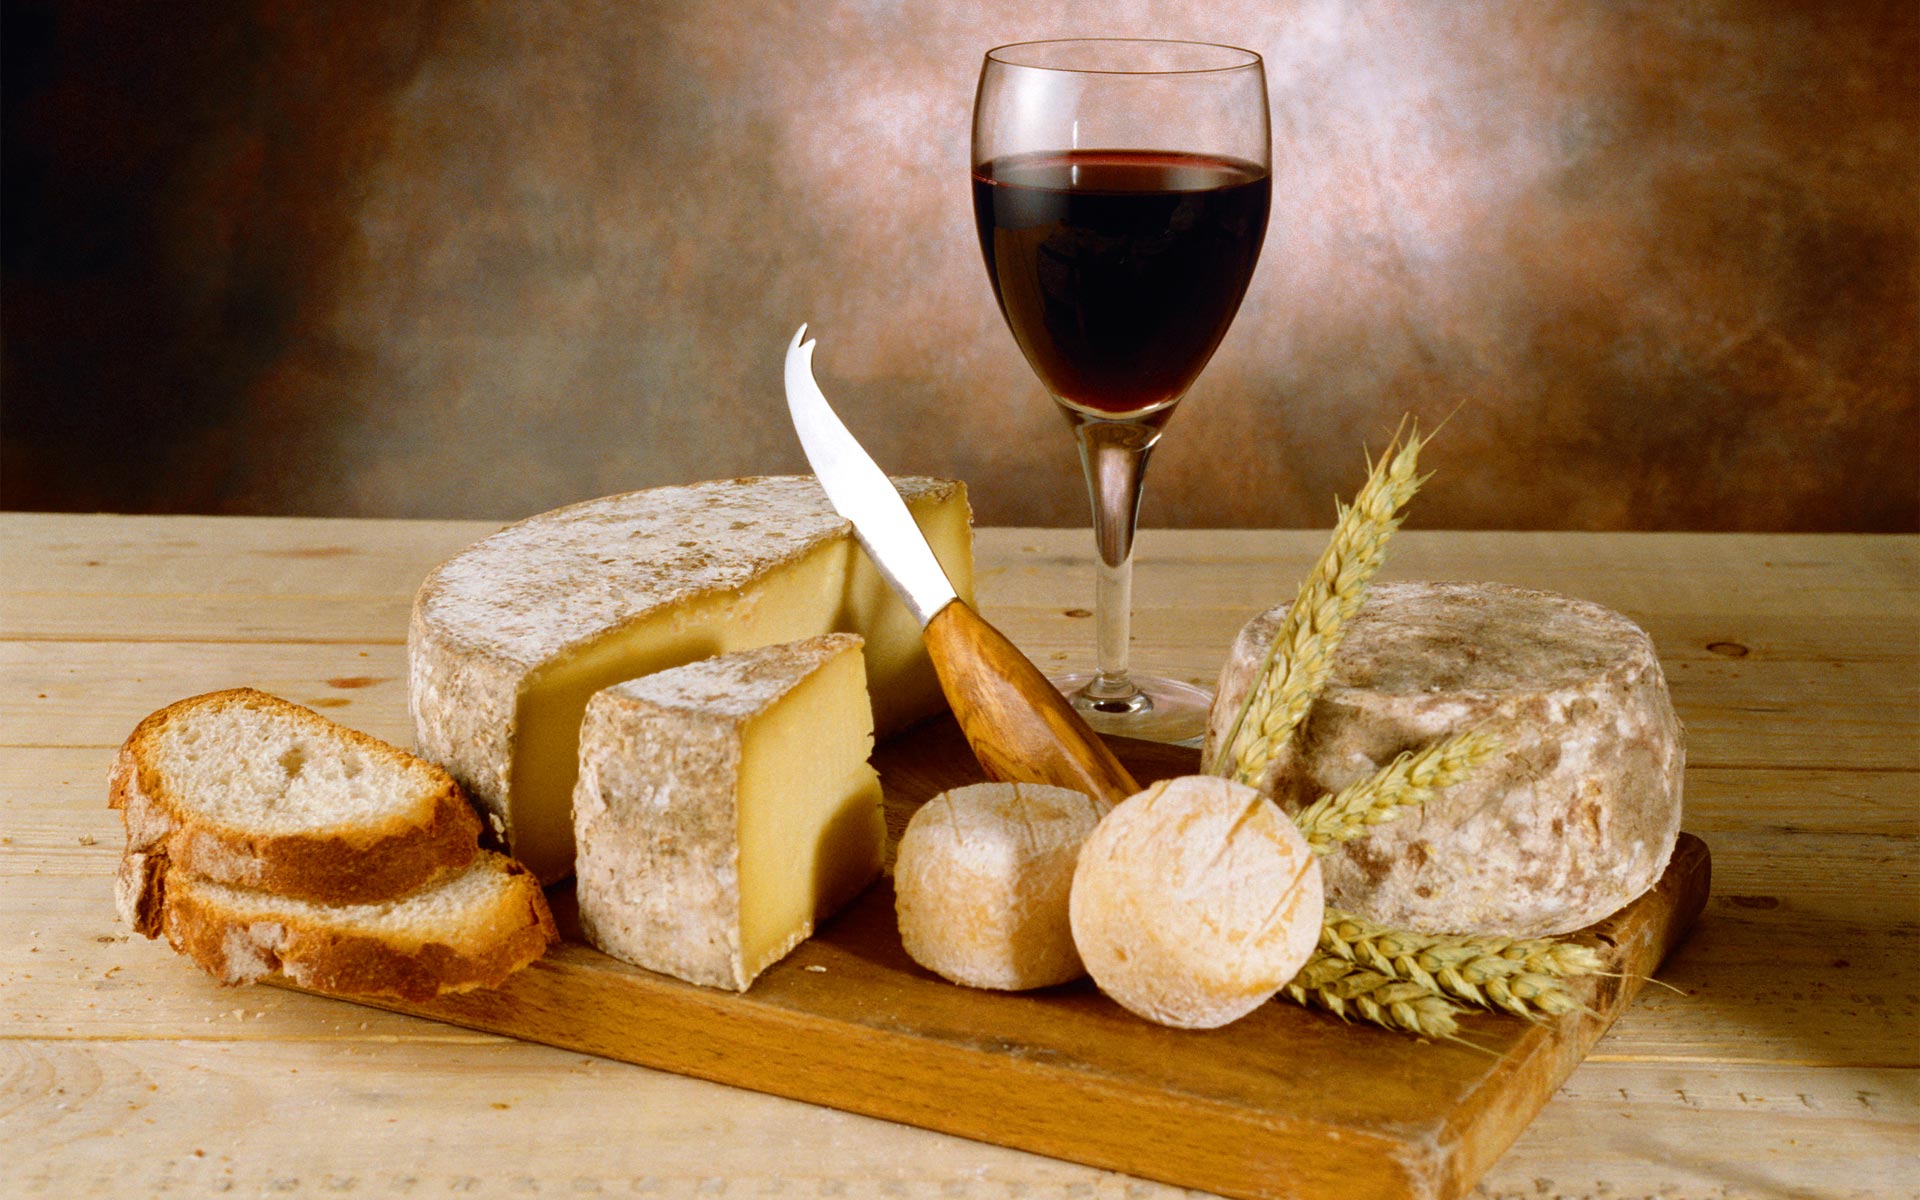 Each cheese with its own wine, each wine with its own cheese...